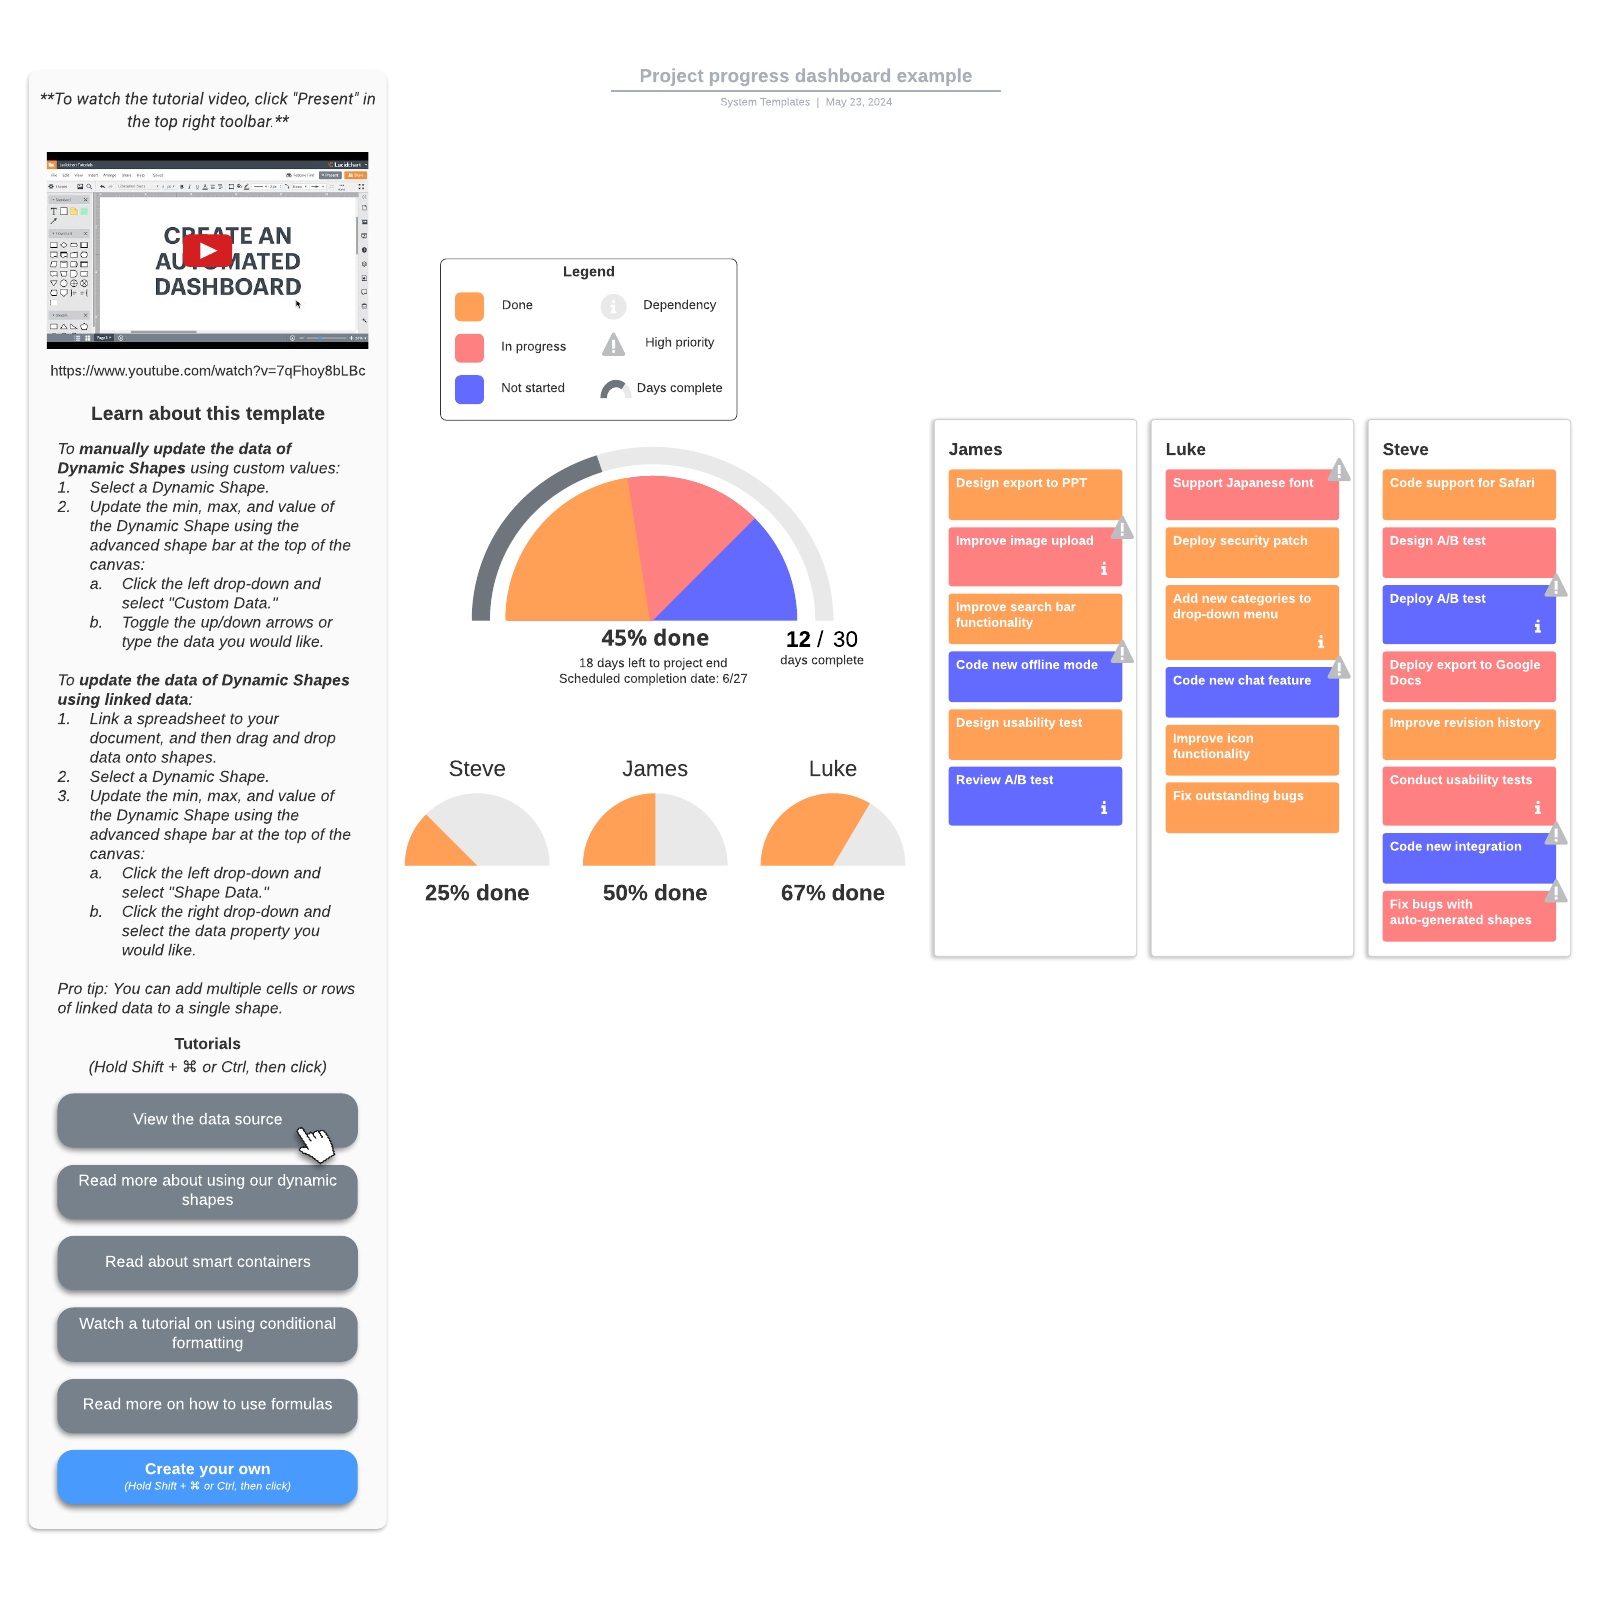 Project progress dashboard example example